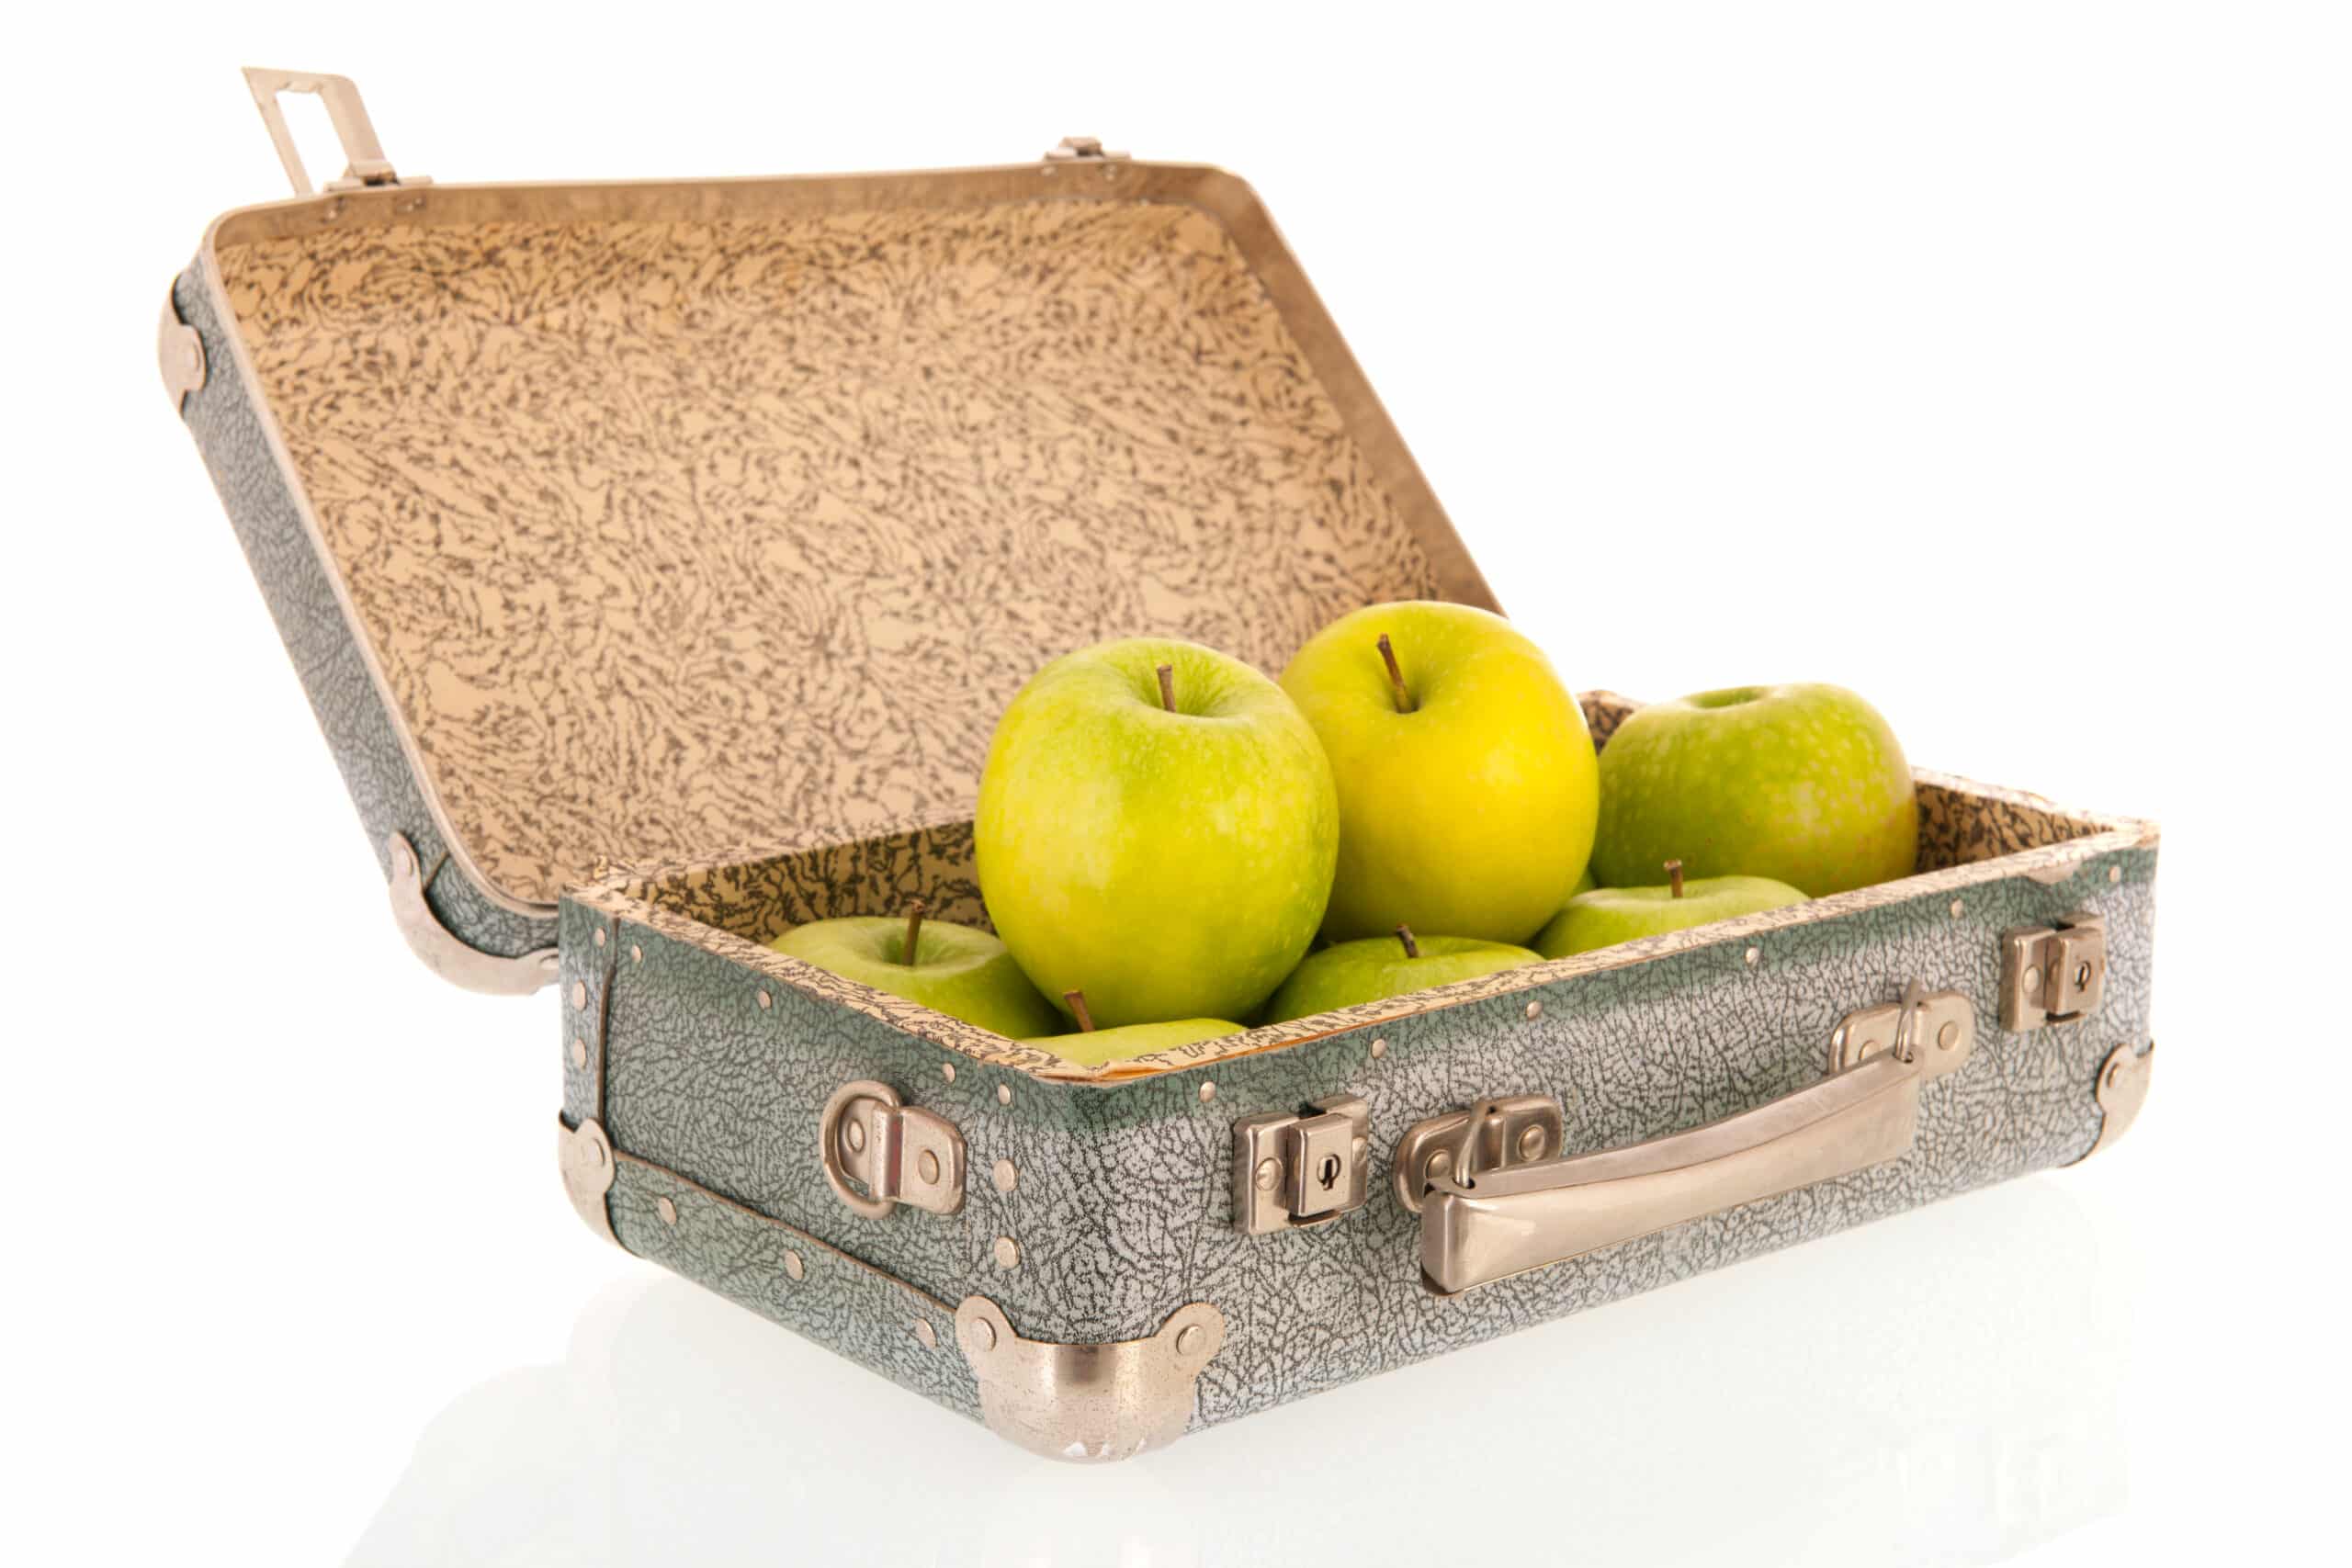 Can I pack food in my checked luggage? Vintage open carton suitcase filled with apples isolated over white background